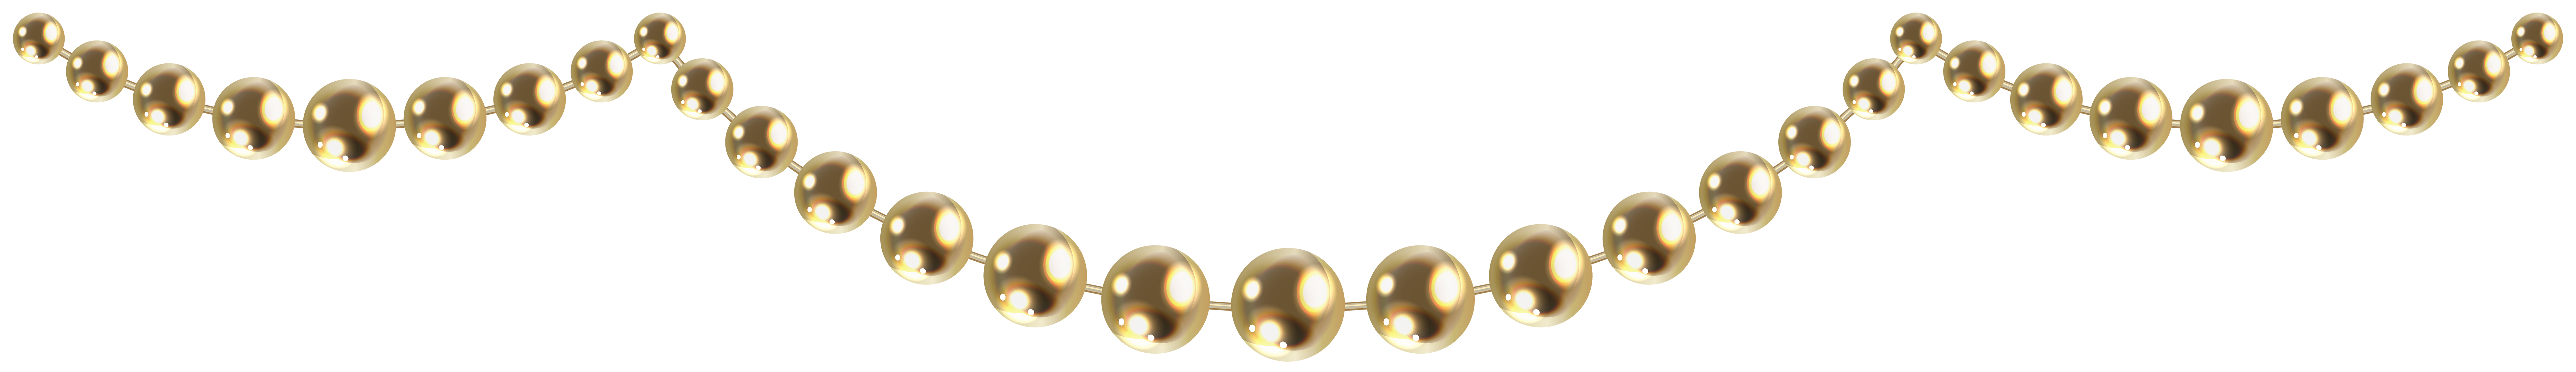 Download PNG image - Beads PNG File 